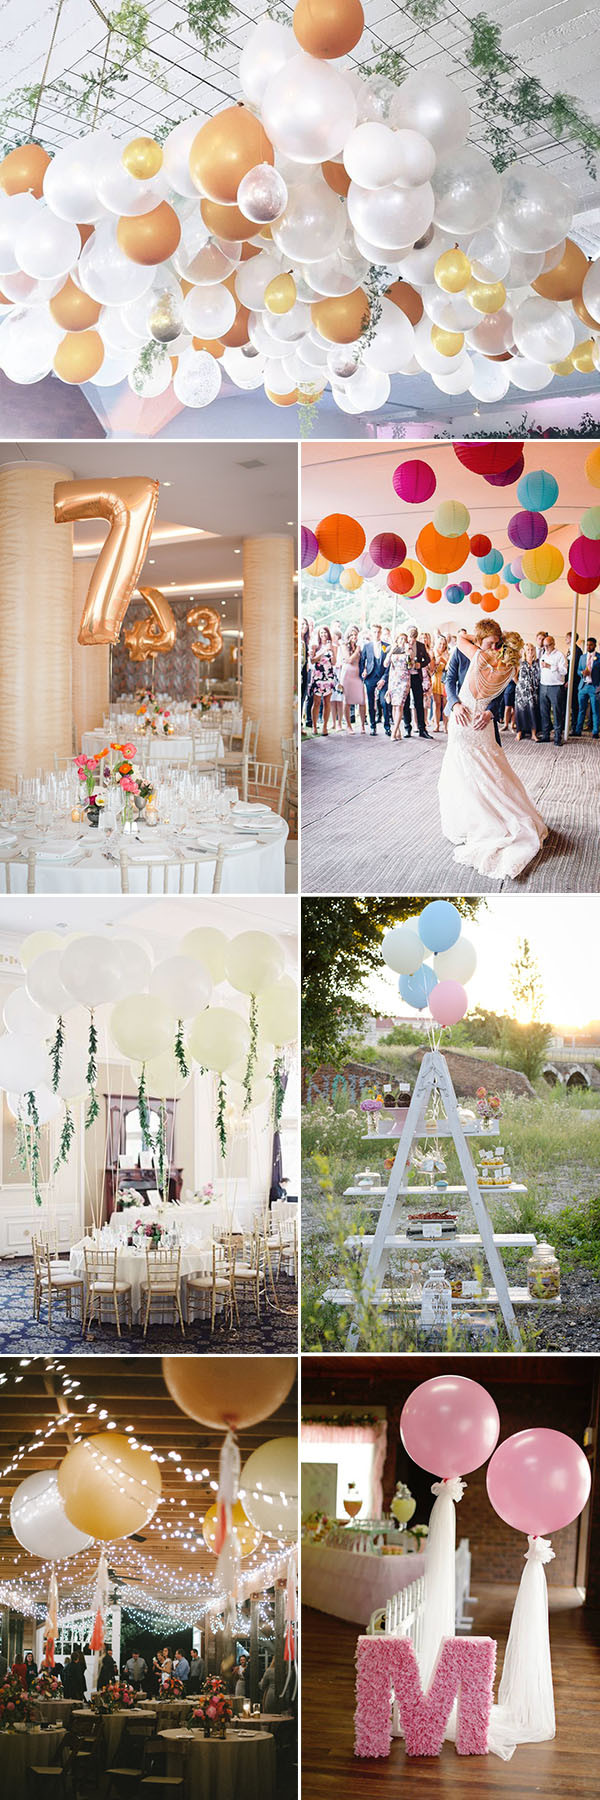 Balloon Decorations For Weddings
 45 Creative Fun Ways To Incorporate Balloons Into Your